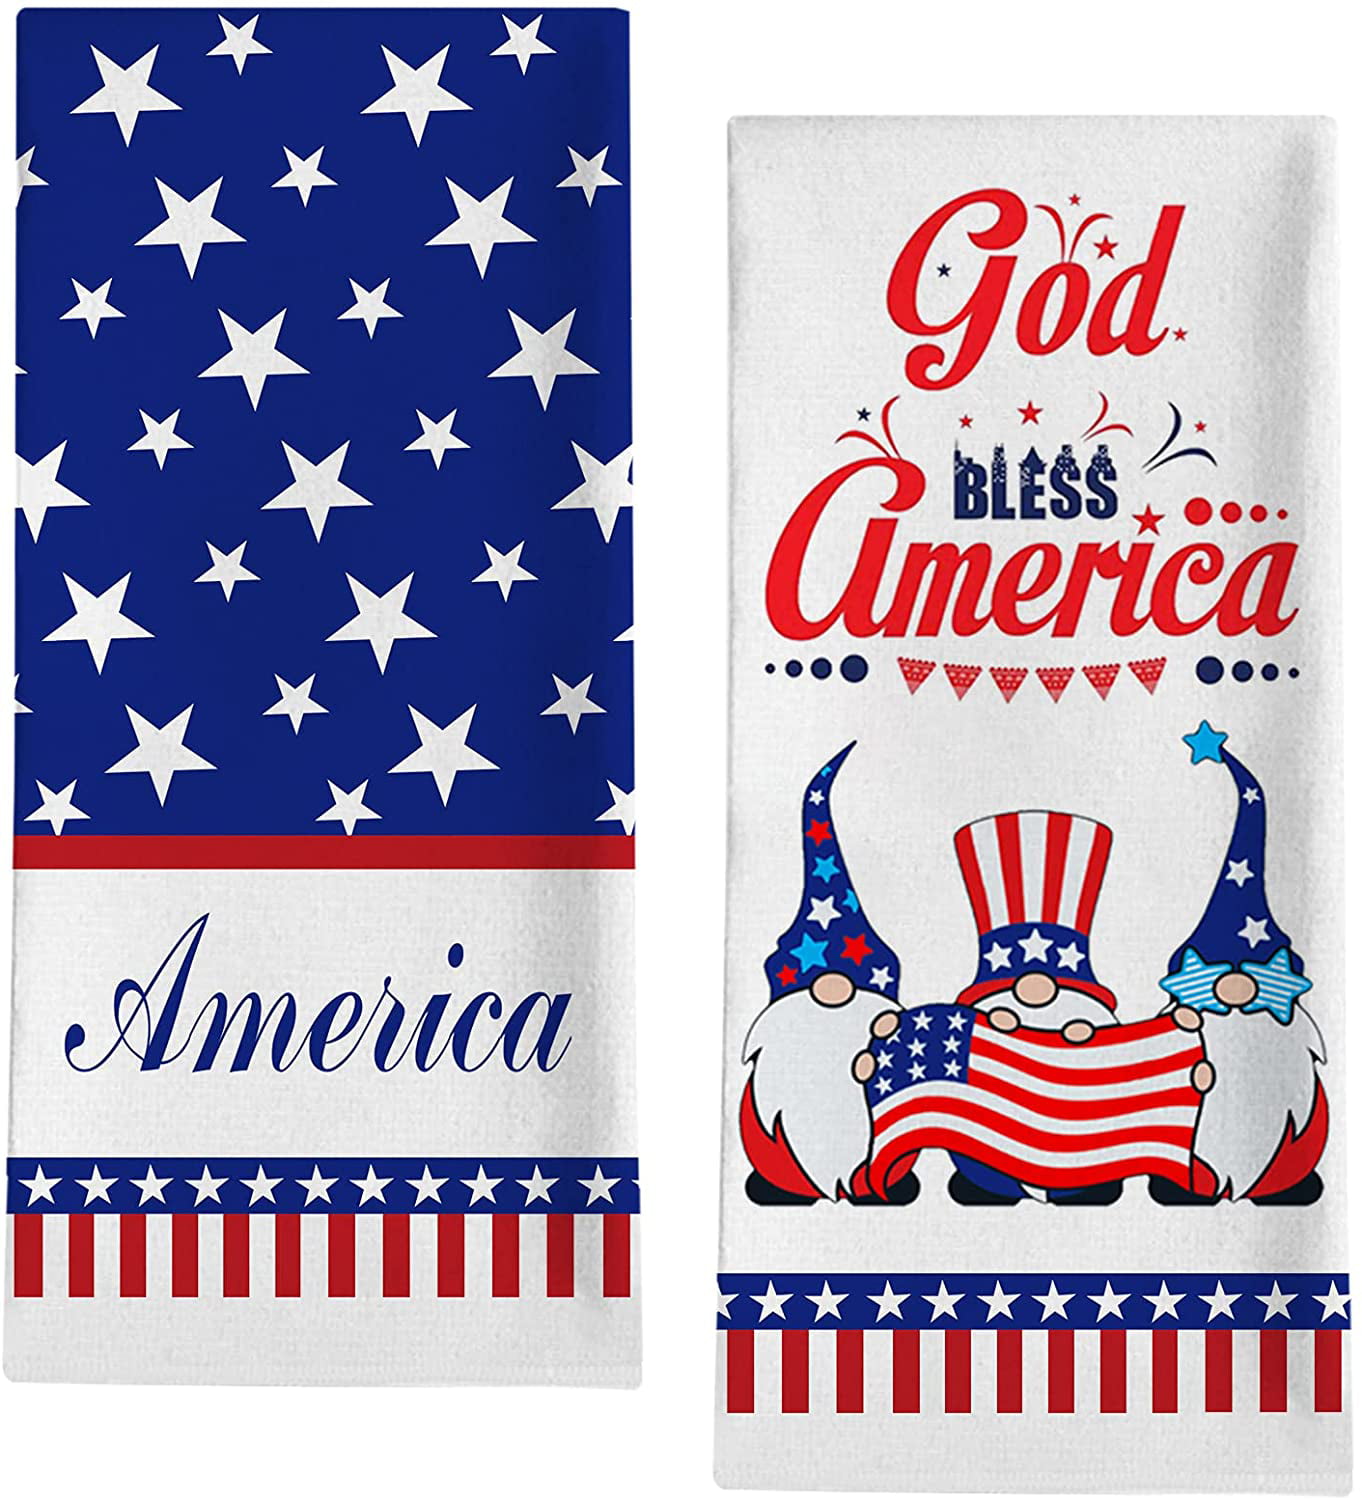 Tea Towel Fourth of July Decor Red White Blue Towel Patriotic Tea Towel Memorial Day Tea Towel Flower With God Bless America